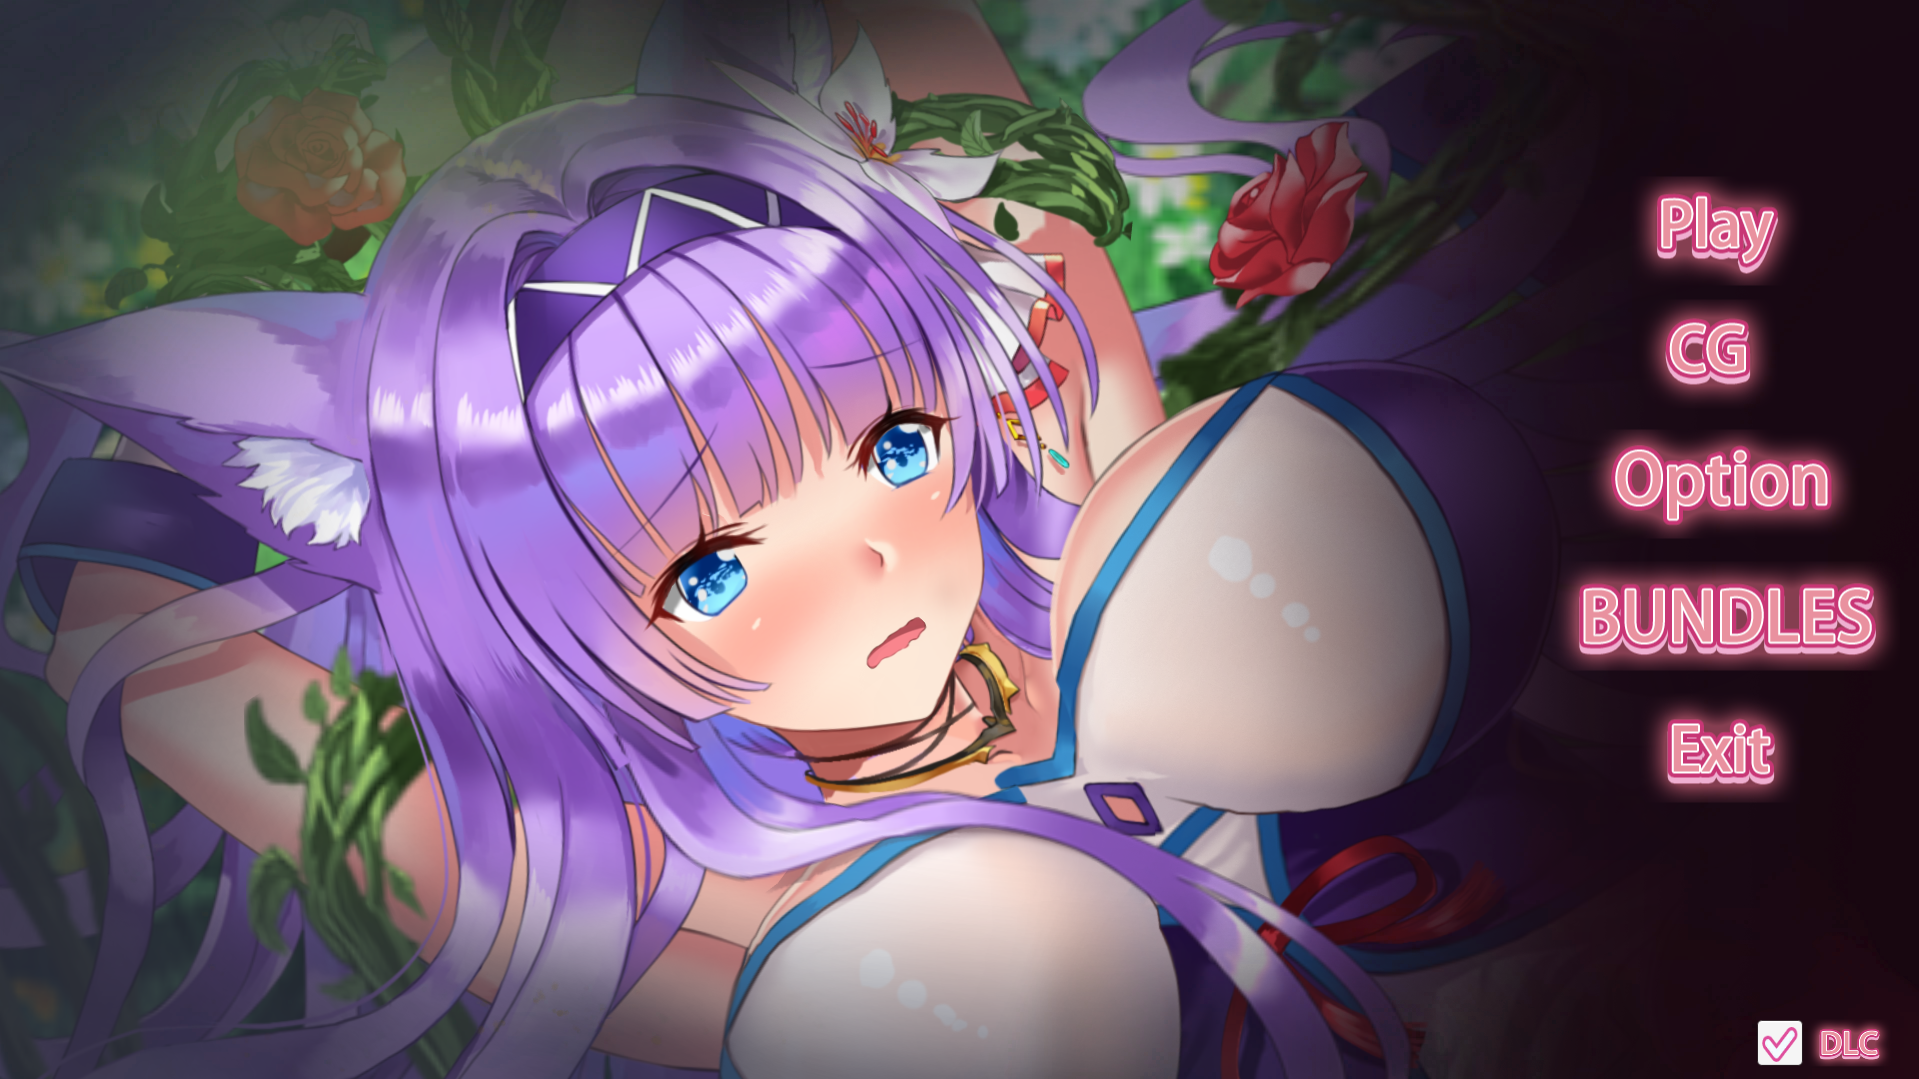 3d Tentacle Hentai Cg - Tentacle Girl [COMPLETED] - free game download, reviews, mega - xGames